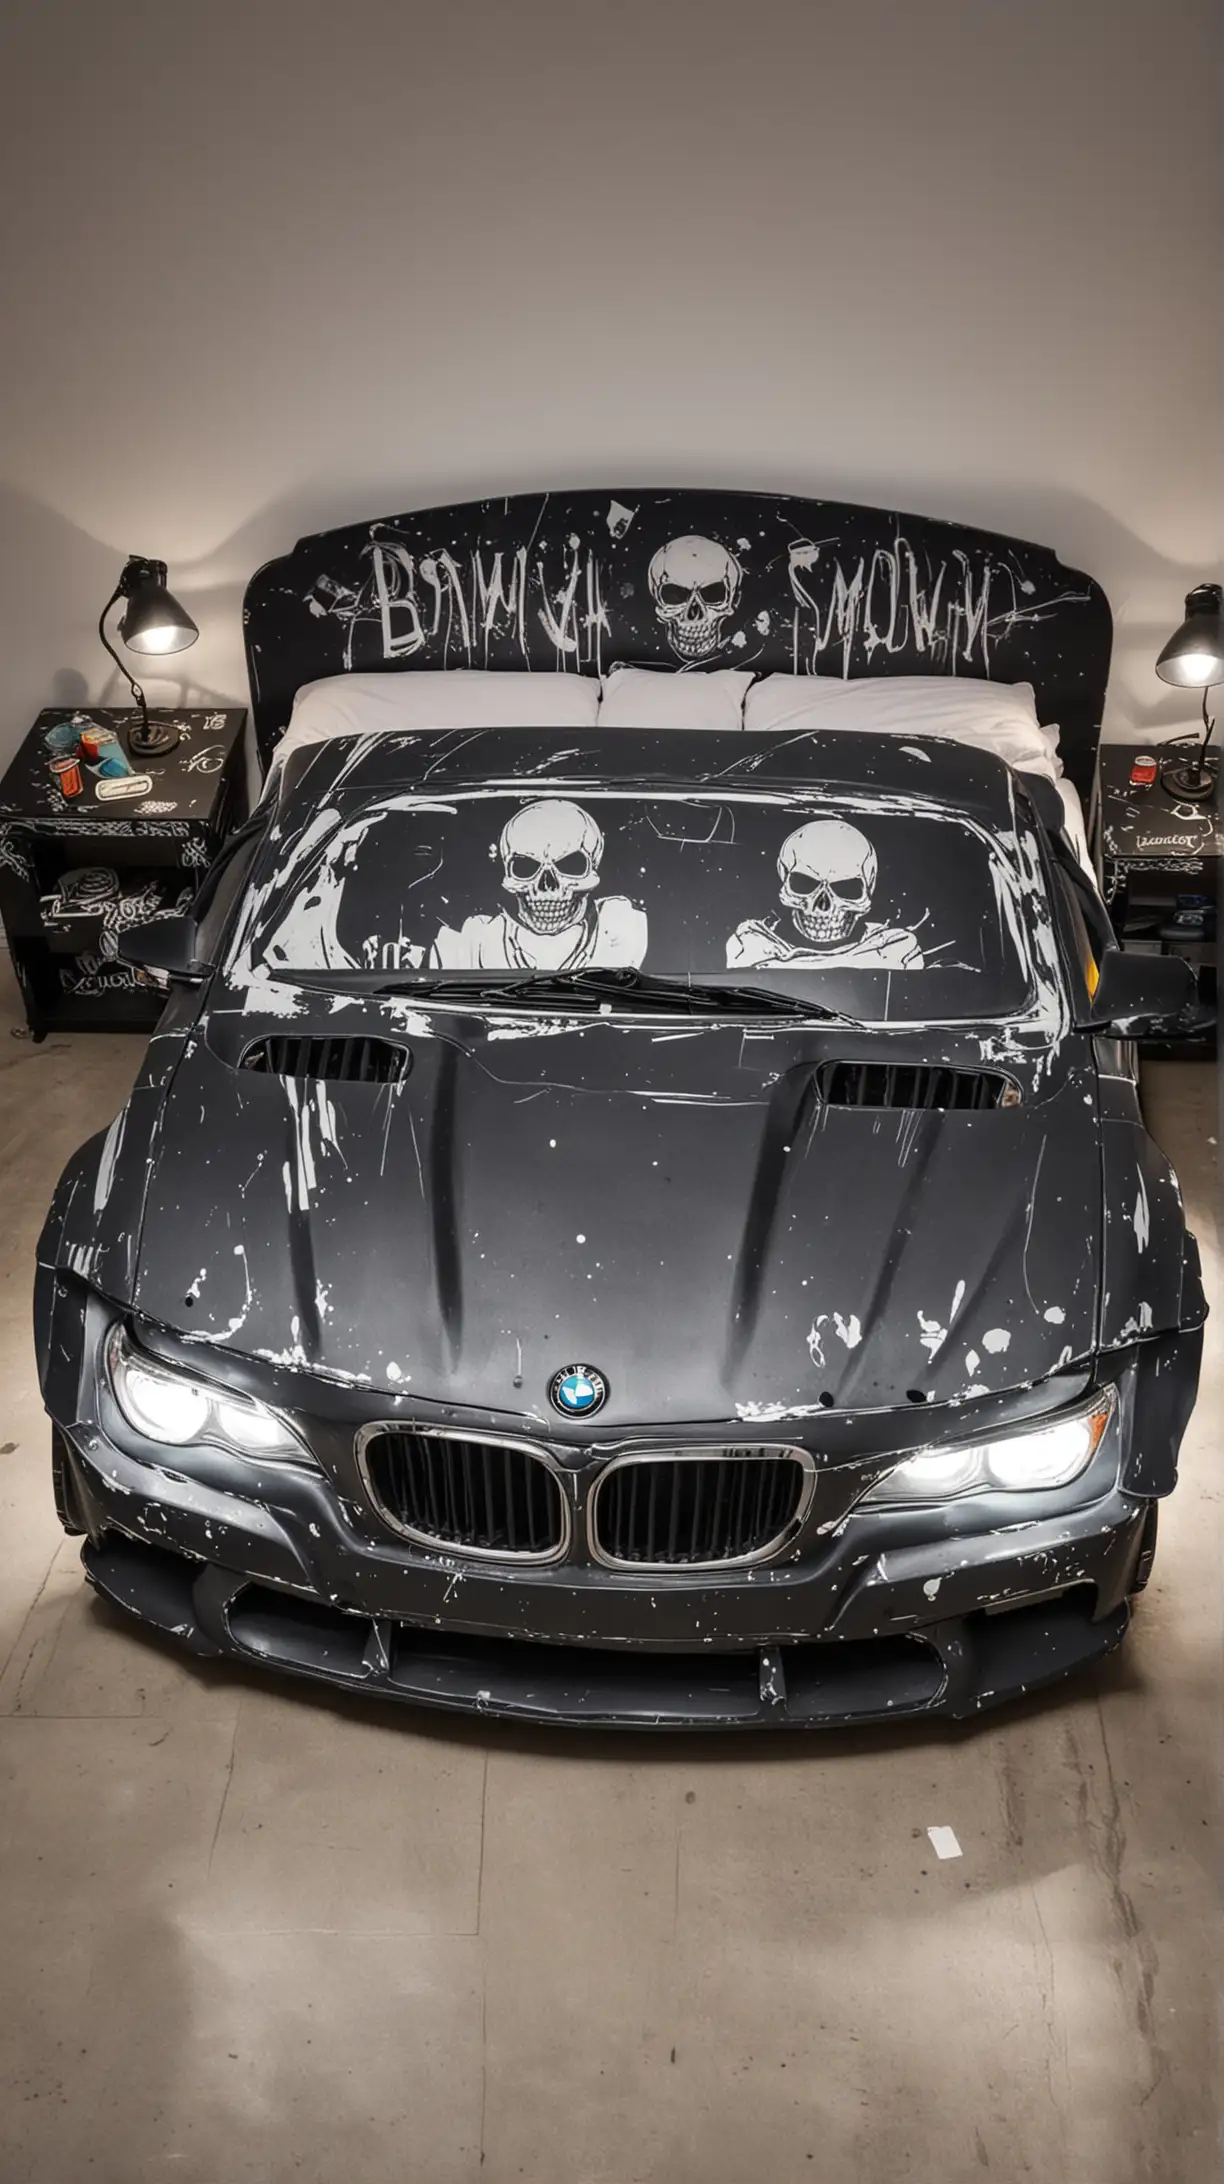 BMW CarShaped Double Bed with Skull Graffiti and Illuminated Headlights